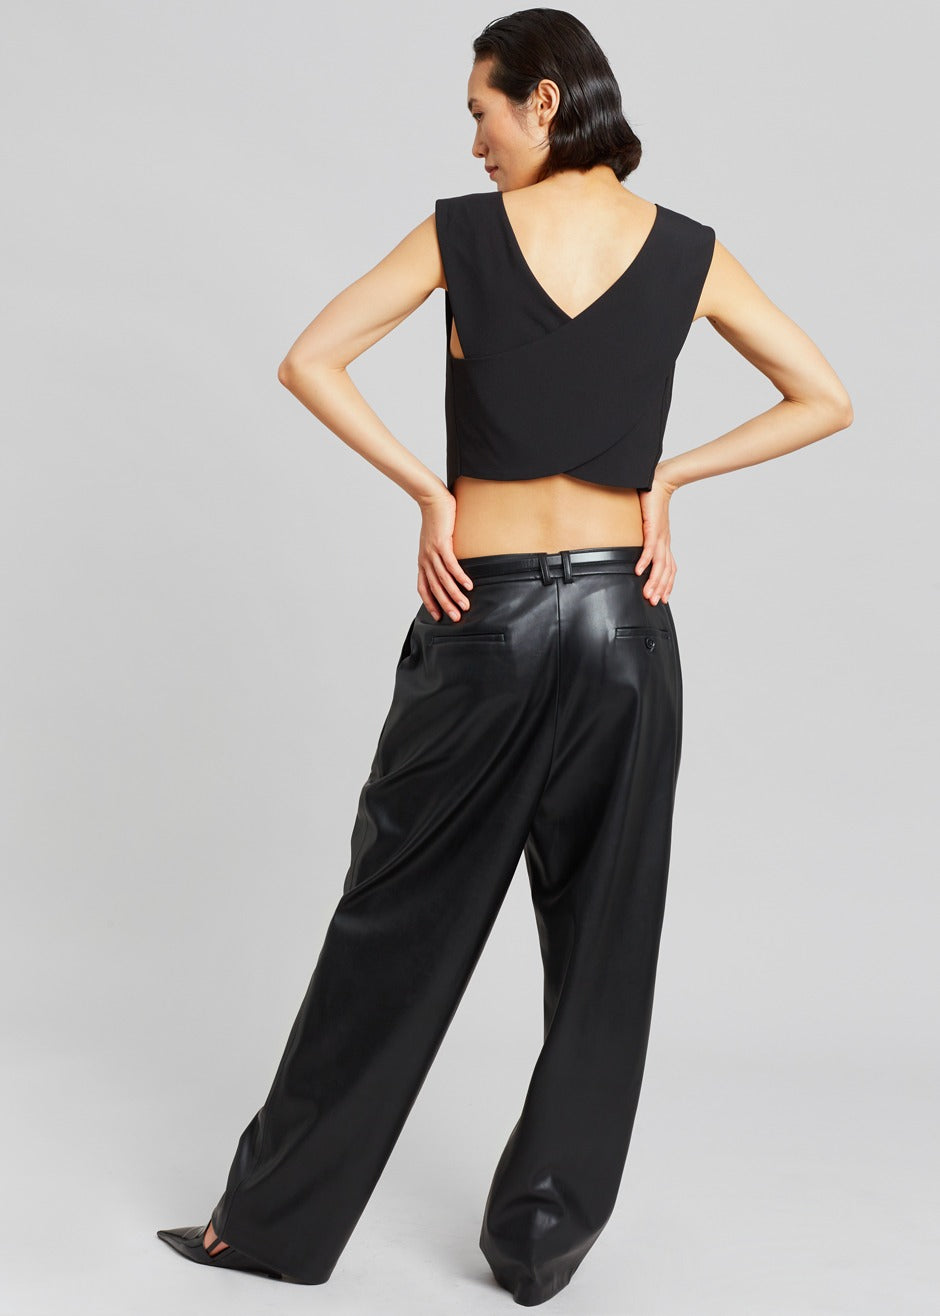 ASOS DESIGN Tall faux leather pull on trouser in black | ASOS